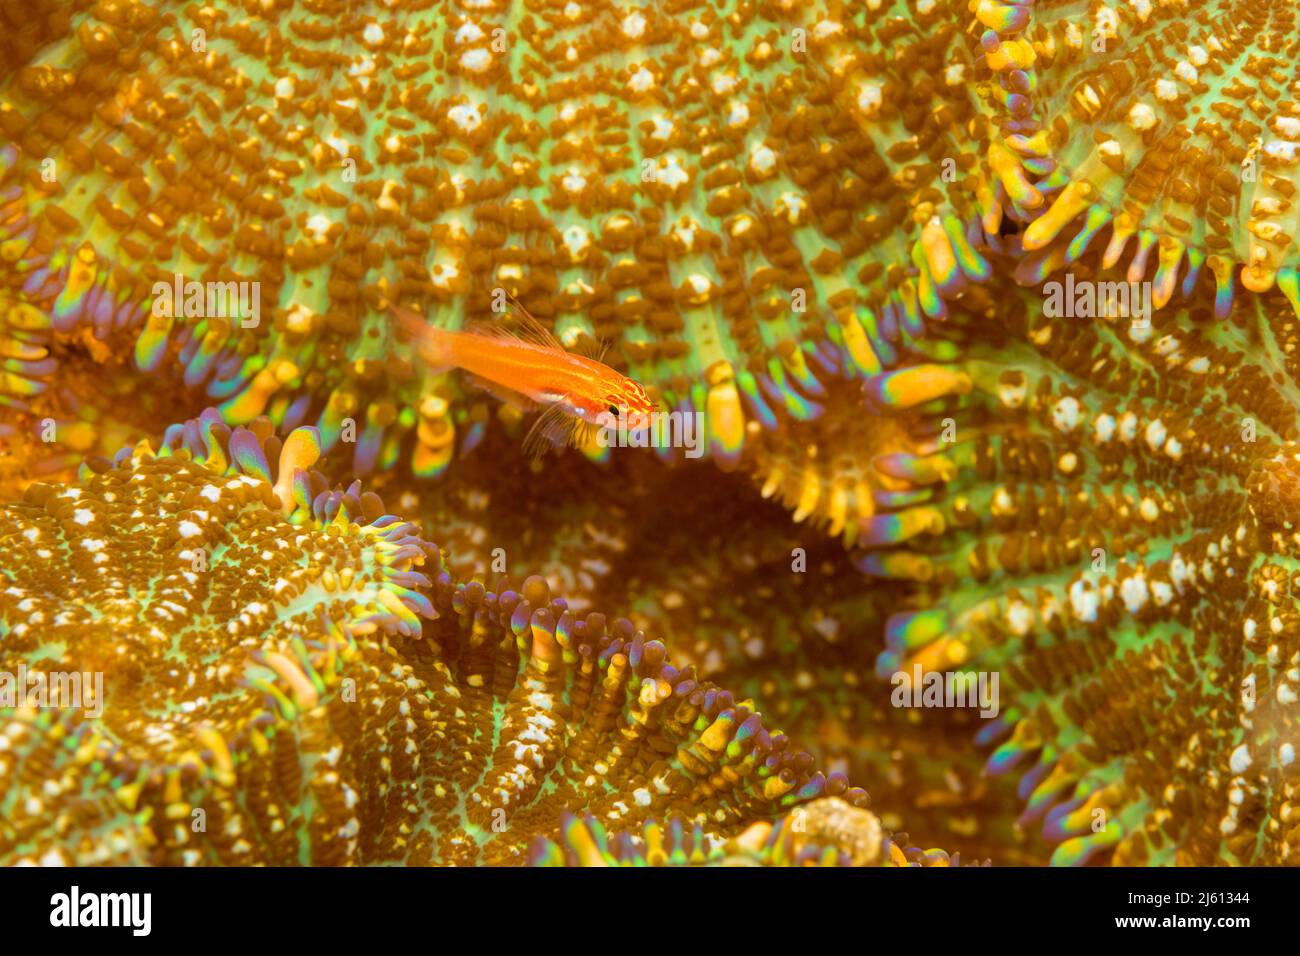 A juvenile striped triplefin, Helcogramma striata, hovering over a colony of corallimorphs, also known as mushroom corals, Discosoma or Actinodiscus s Stock Photo